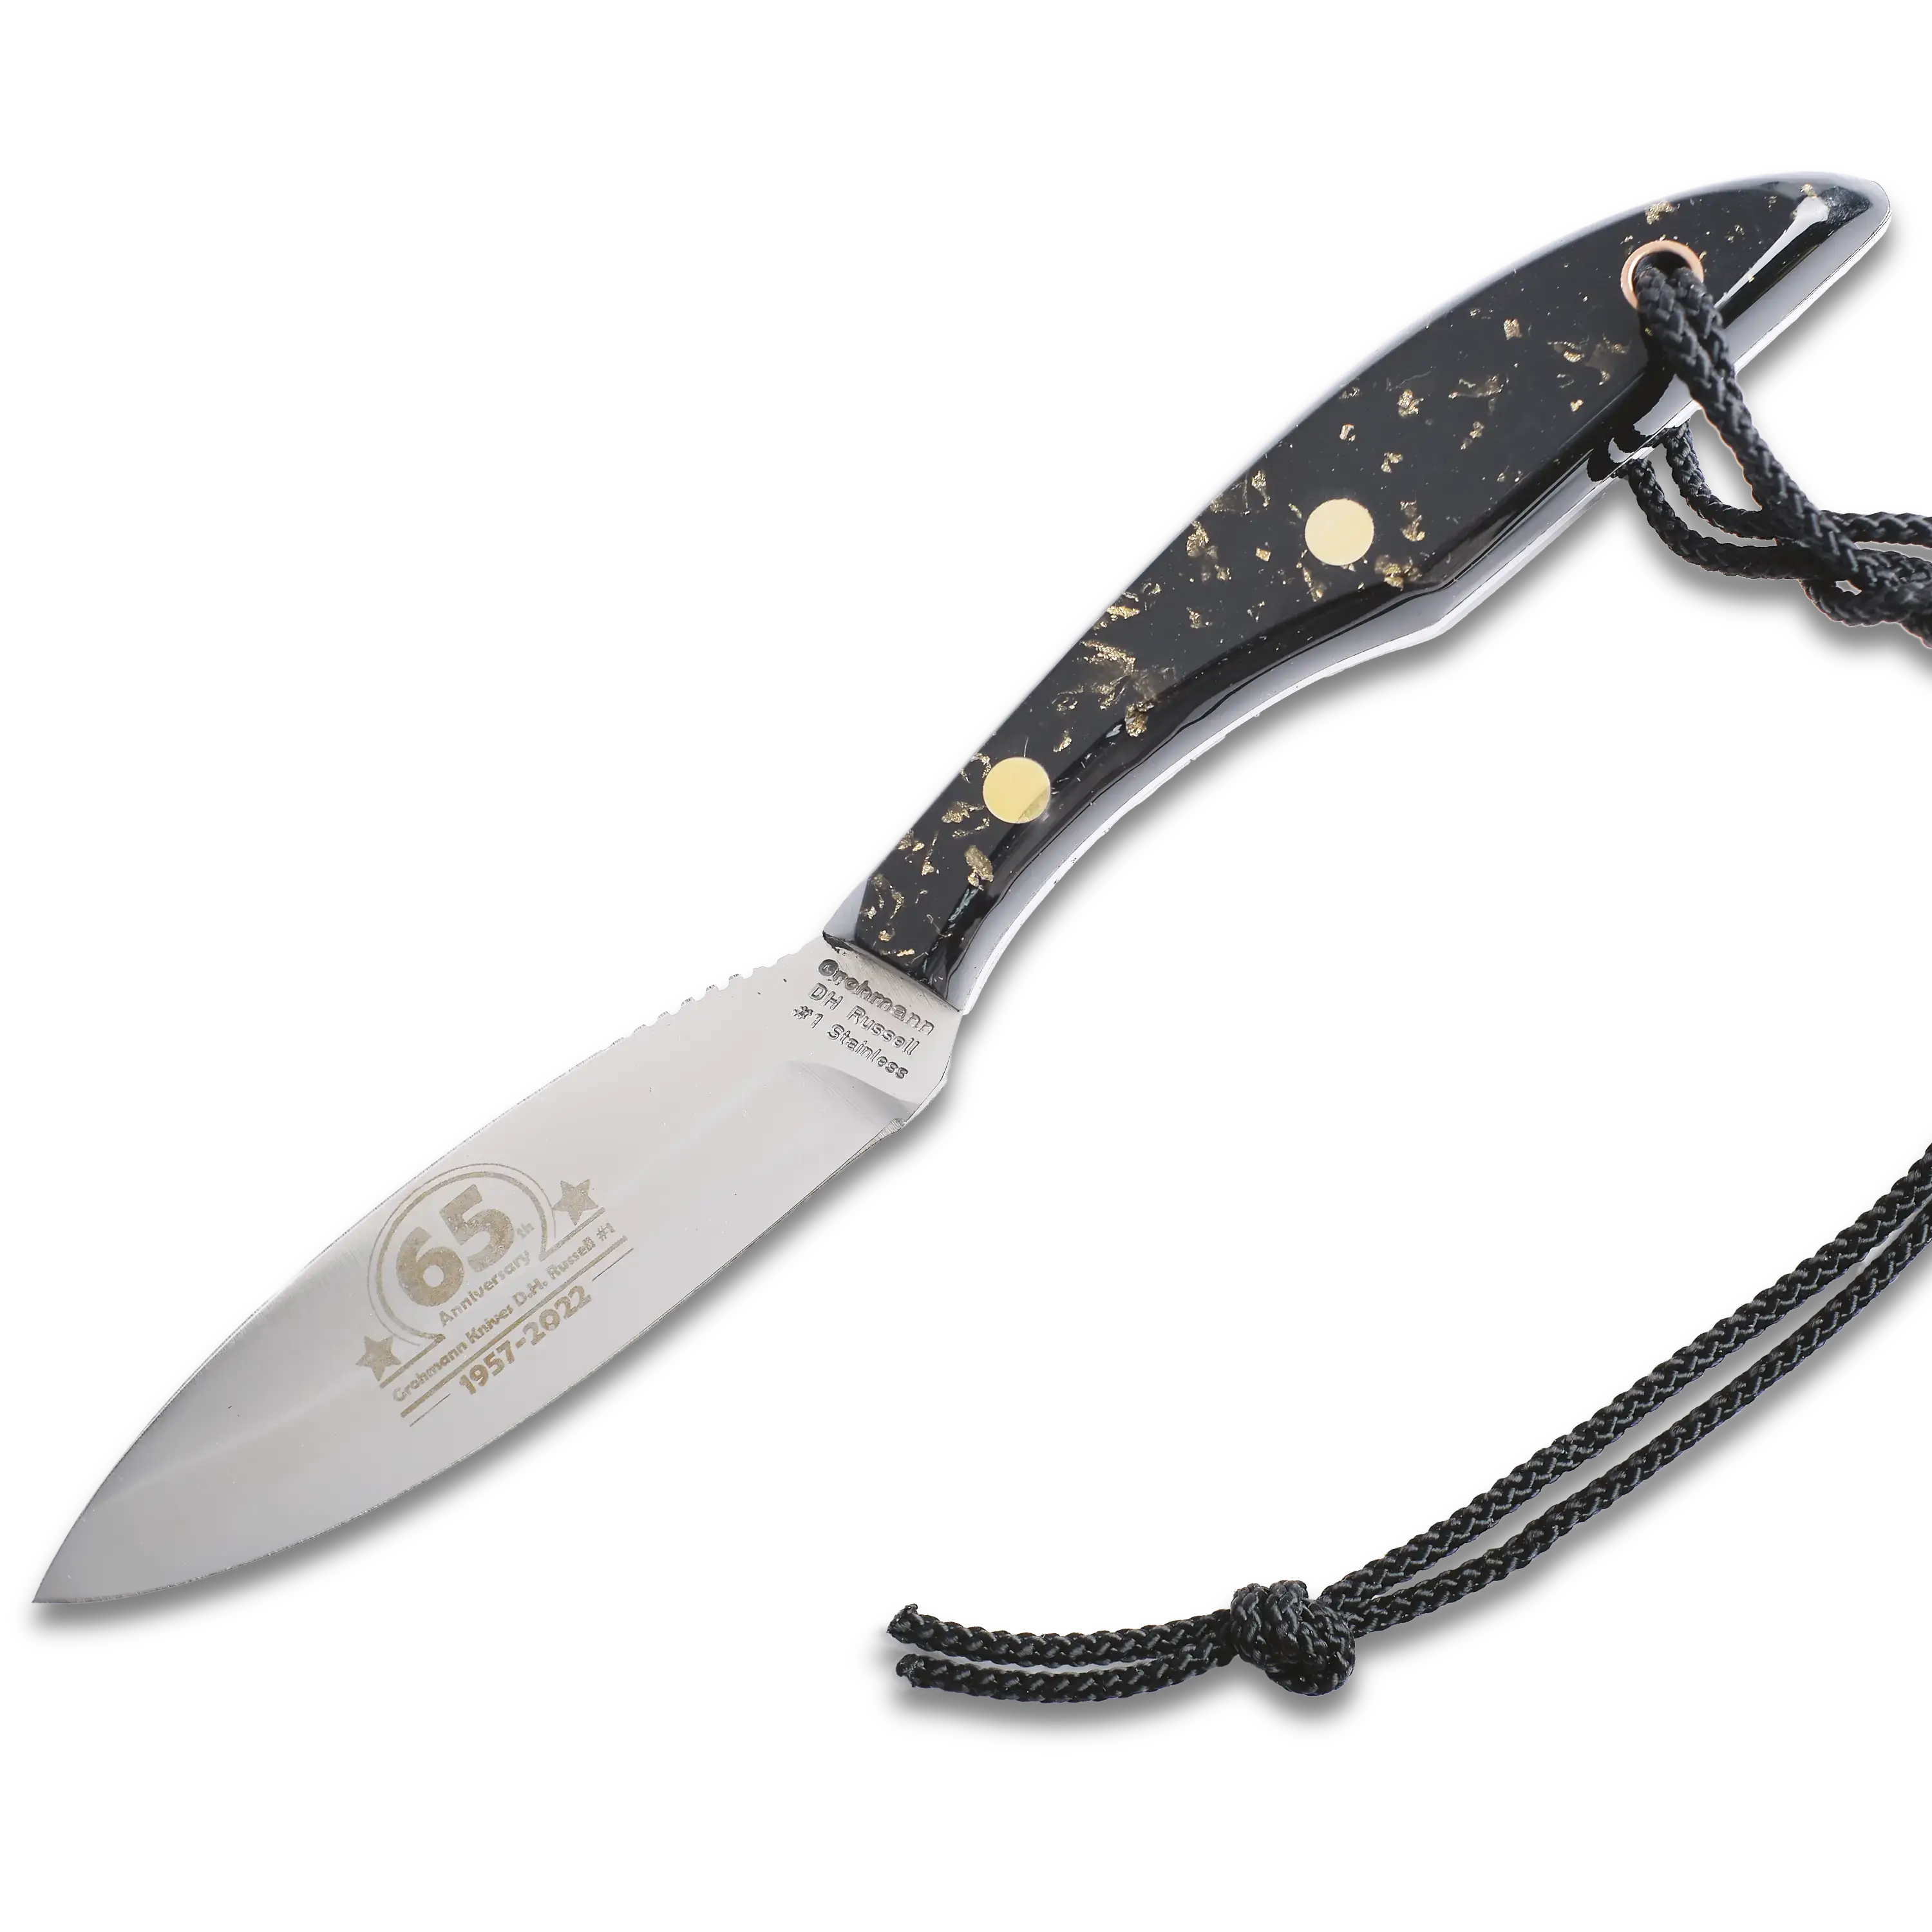 65 Anniversary Edition | D.H Russel Canadian Belt 65 Anniversary Knife, Black/Gold